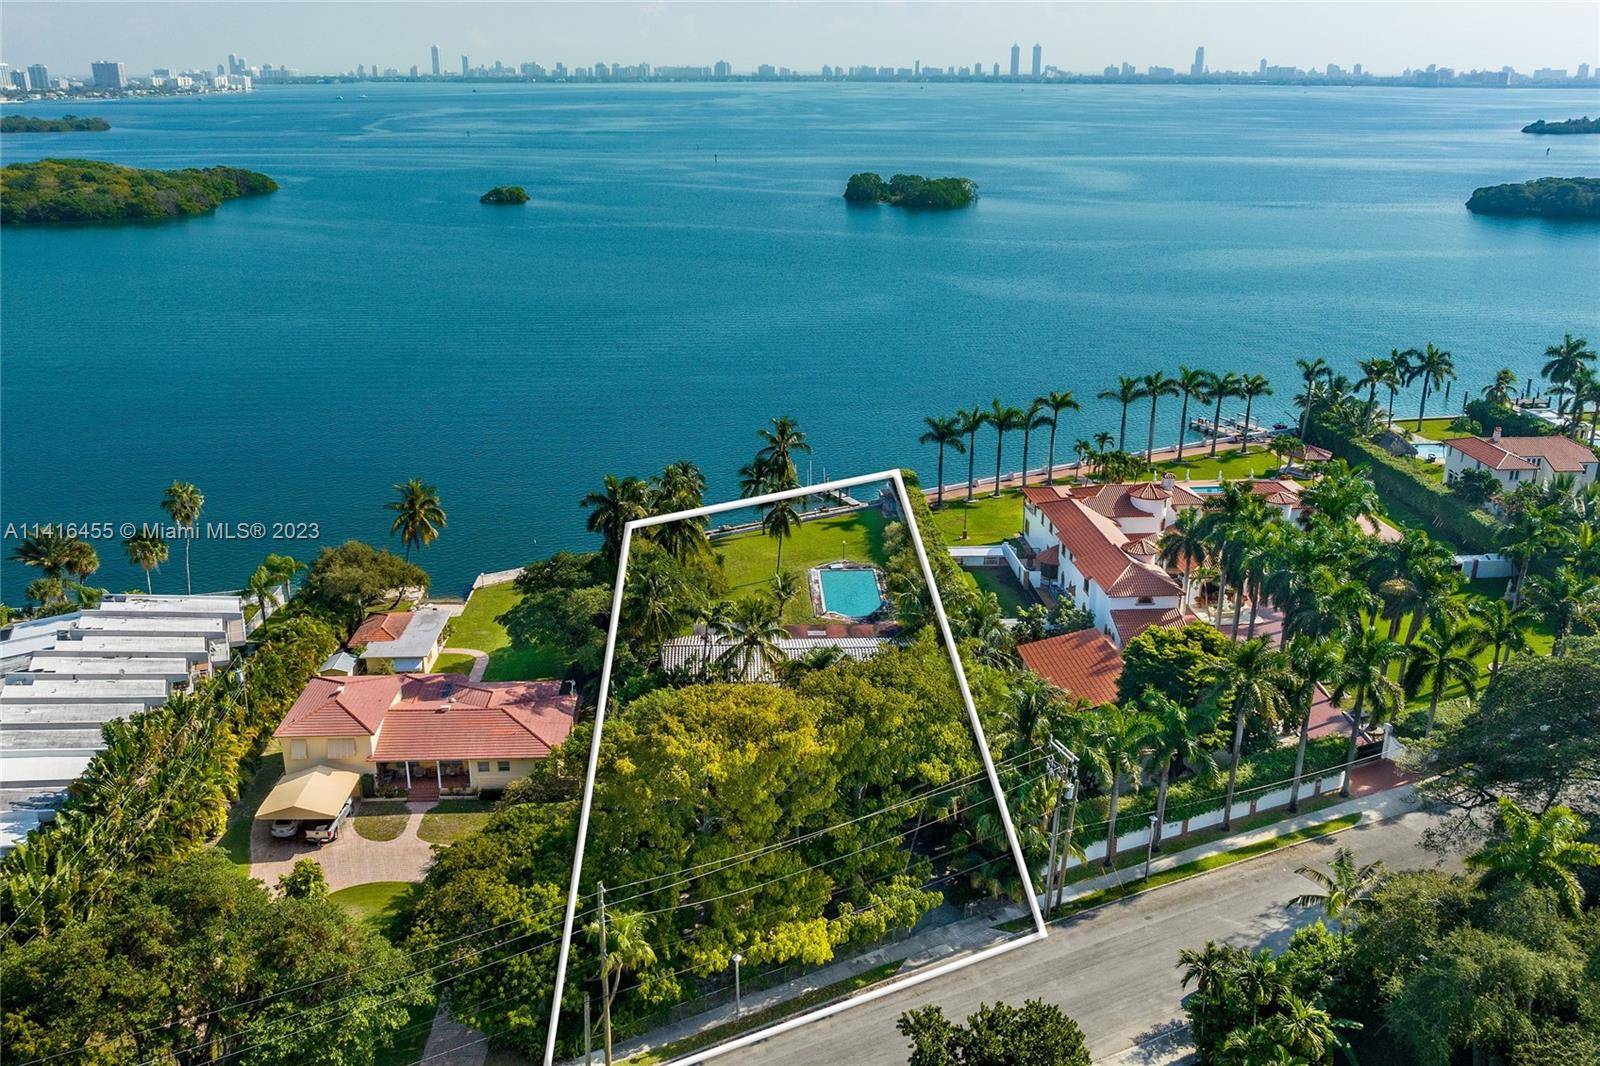 Build your dream home with some of the most stunning wide bay views in the city.